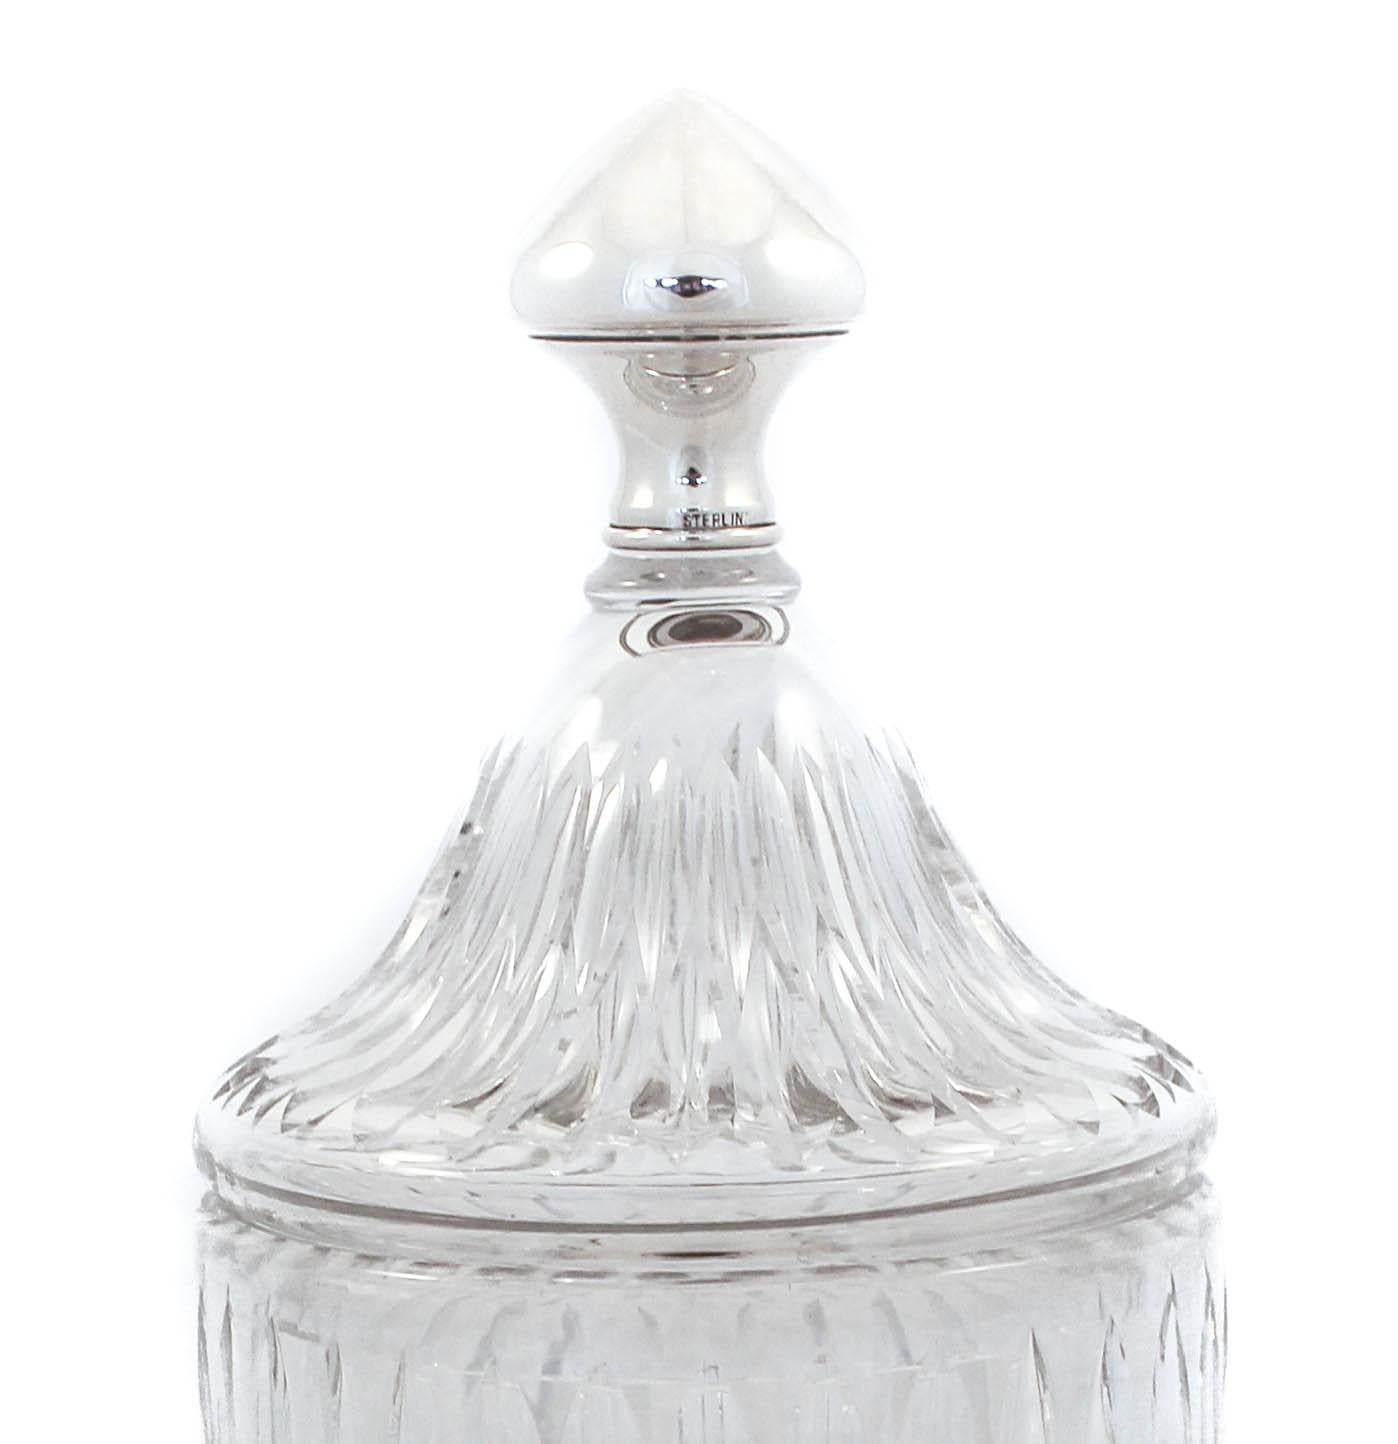 We are delighted to offer this sterling silver and crystal urn by the world renowned Hawkes Glass Company.
Based in Corning, NY, T.G. Hawkes & Co. (c.1880-1959) was established by Thomas Gibbons Hawkes (1846-1913). Born in Ireland, Hawkes